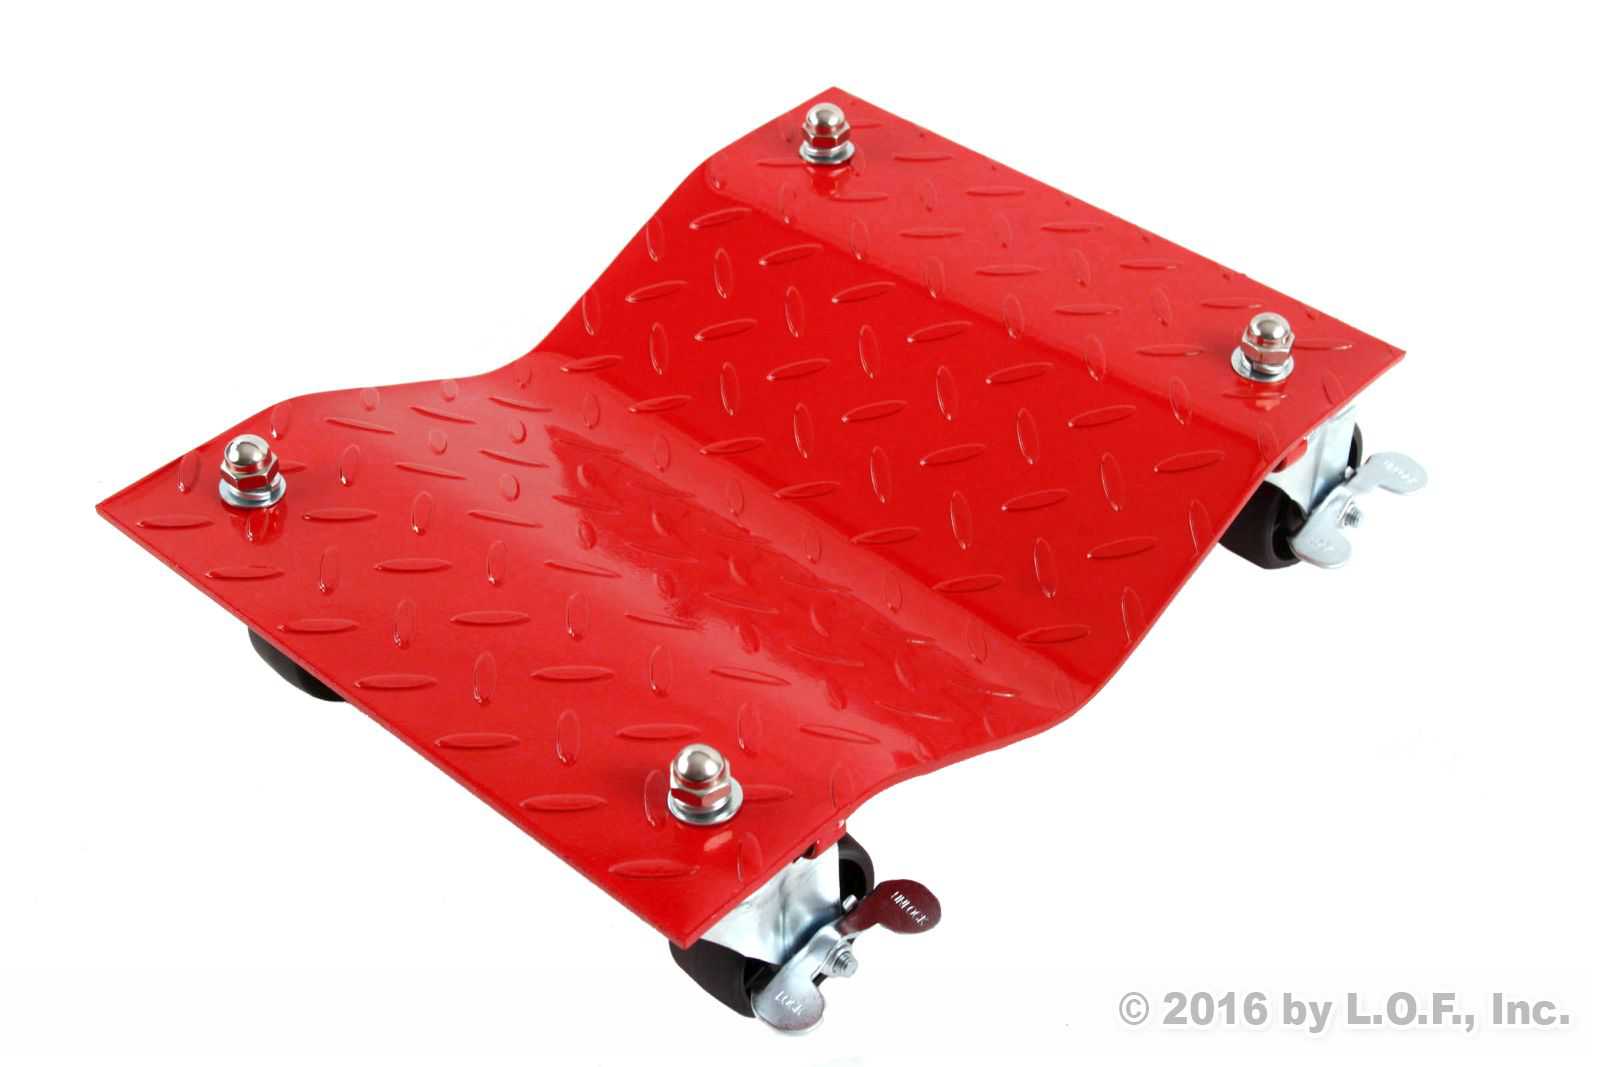 4 - Red 12' Tire Premium Skates Wheel Car Dolly Ball Bearings Skate Makes Moving A Car Easy Furniture Movers